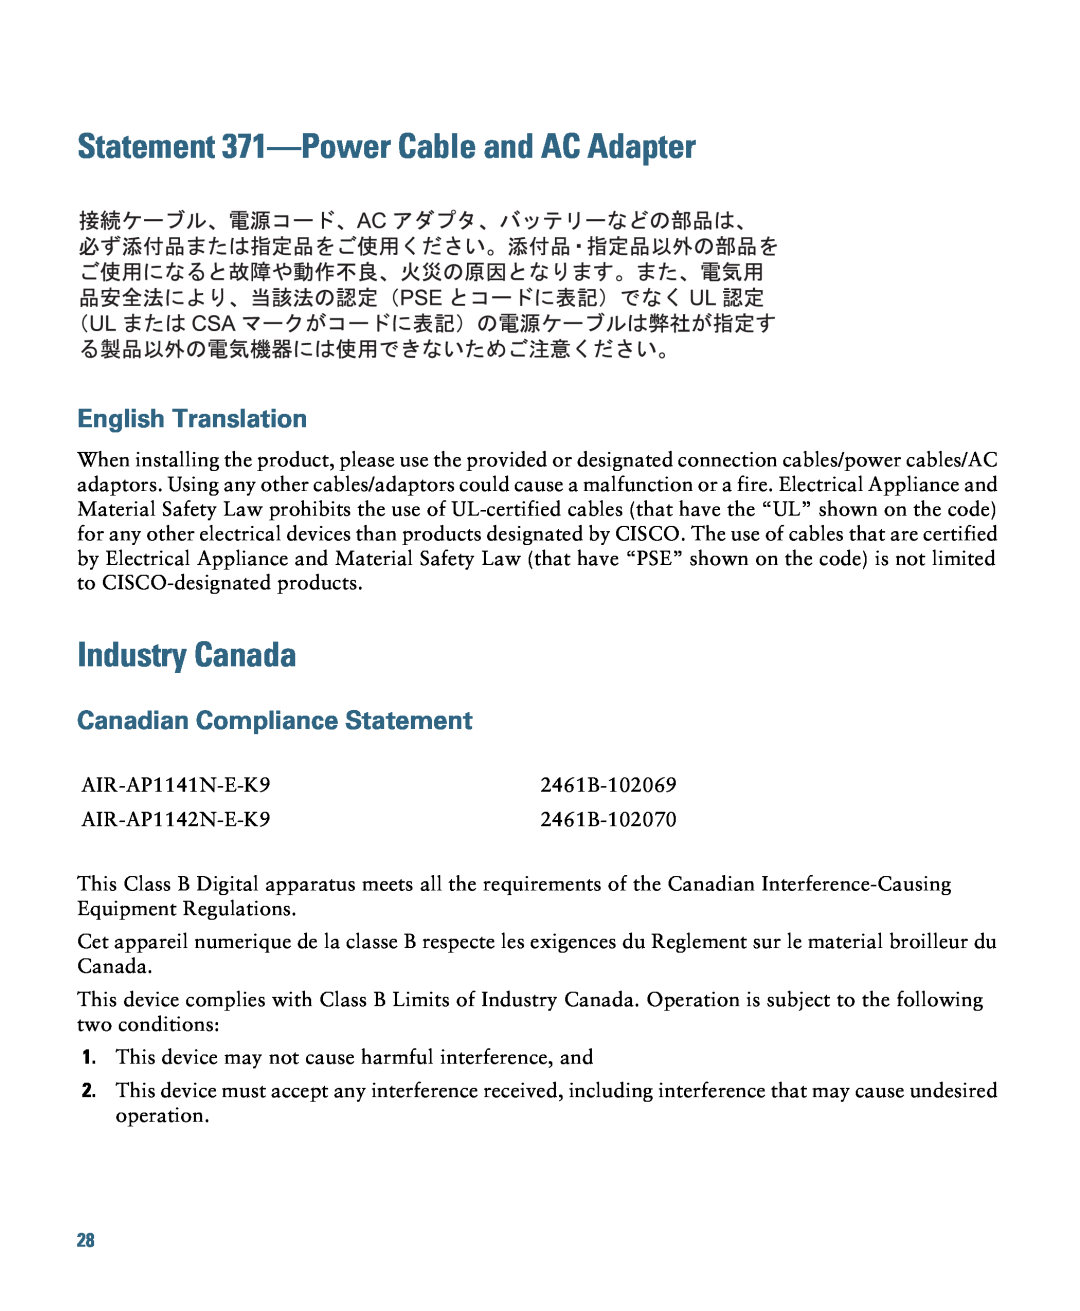 Cisco Systems 1140 specifications Statement 371-Power Cable and AC Adapter, Industry Canada, Canadian Compliance Statement 